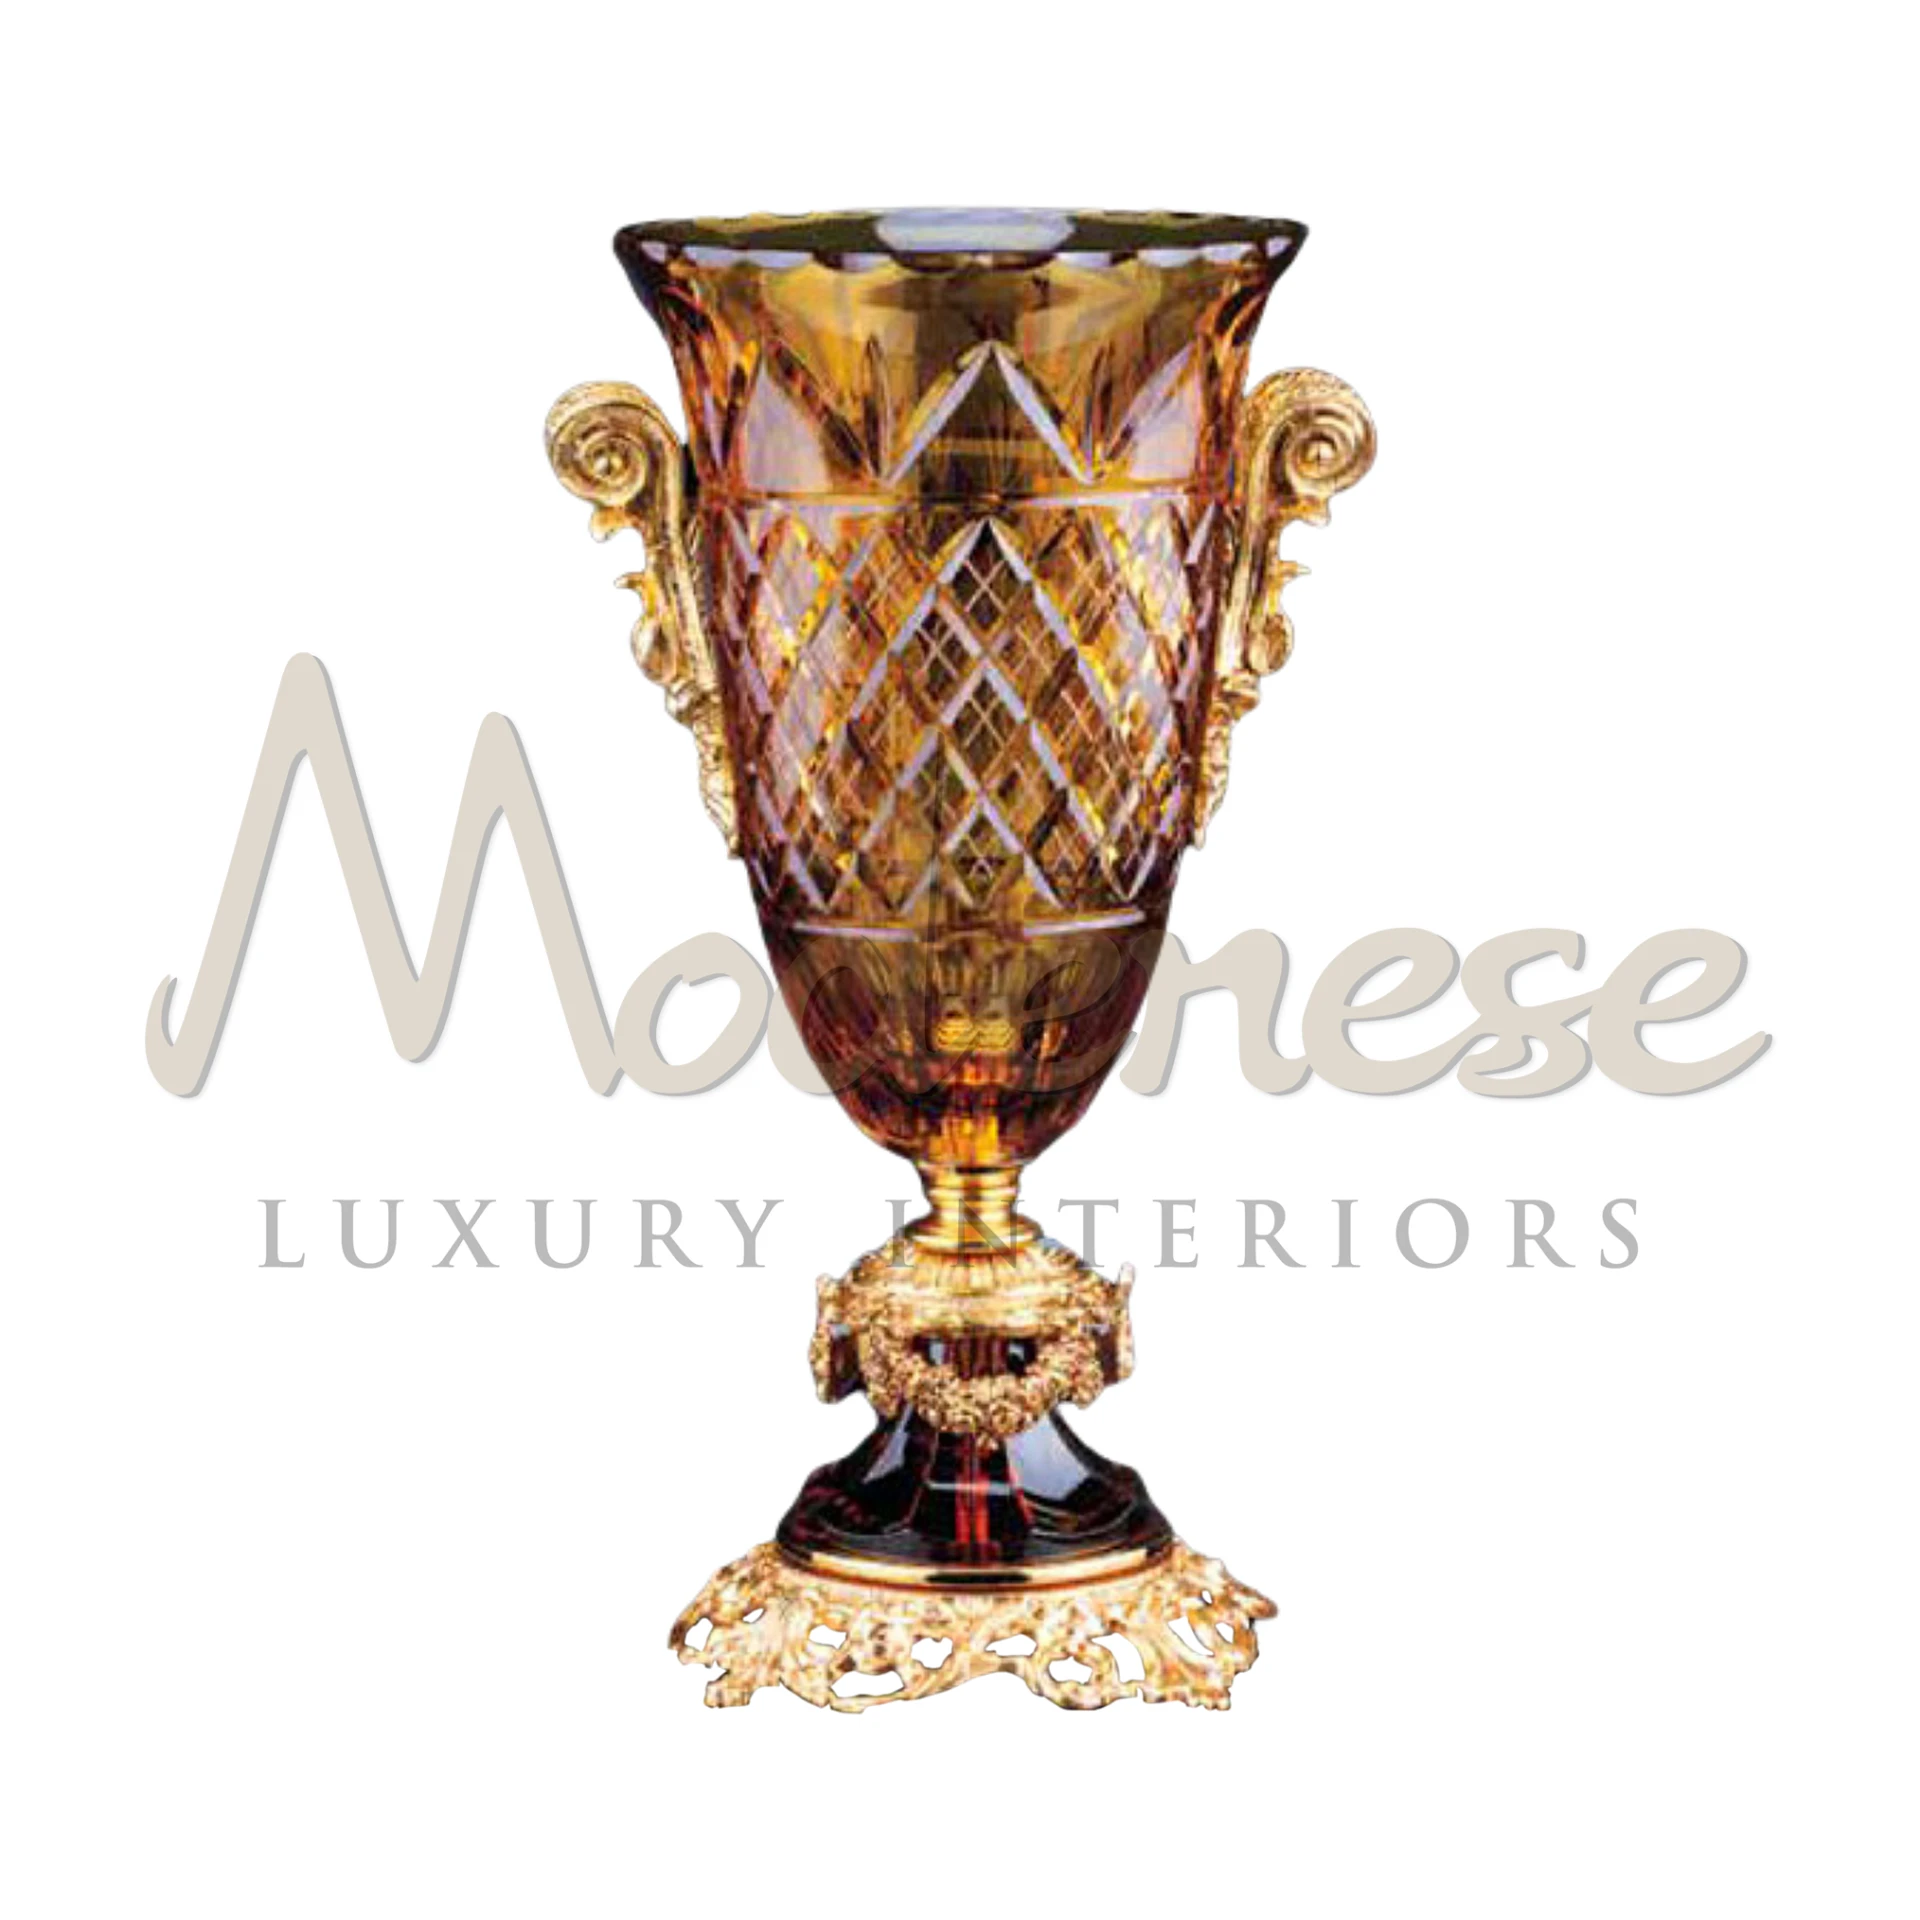 Traditional amber vase with intricate patterns and ornate design, epitomizing classic luxury for baroque and sophisticated interiors.






